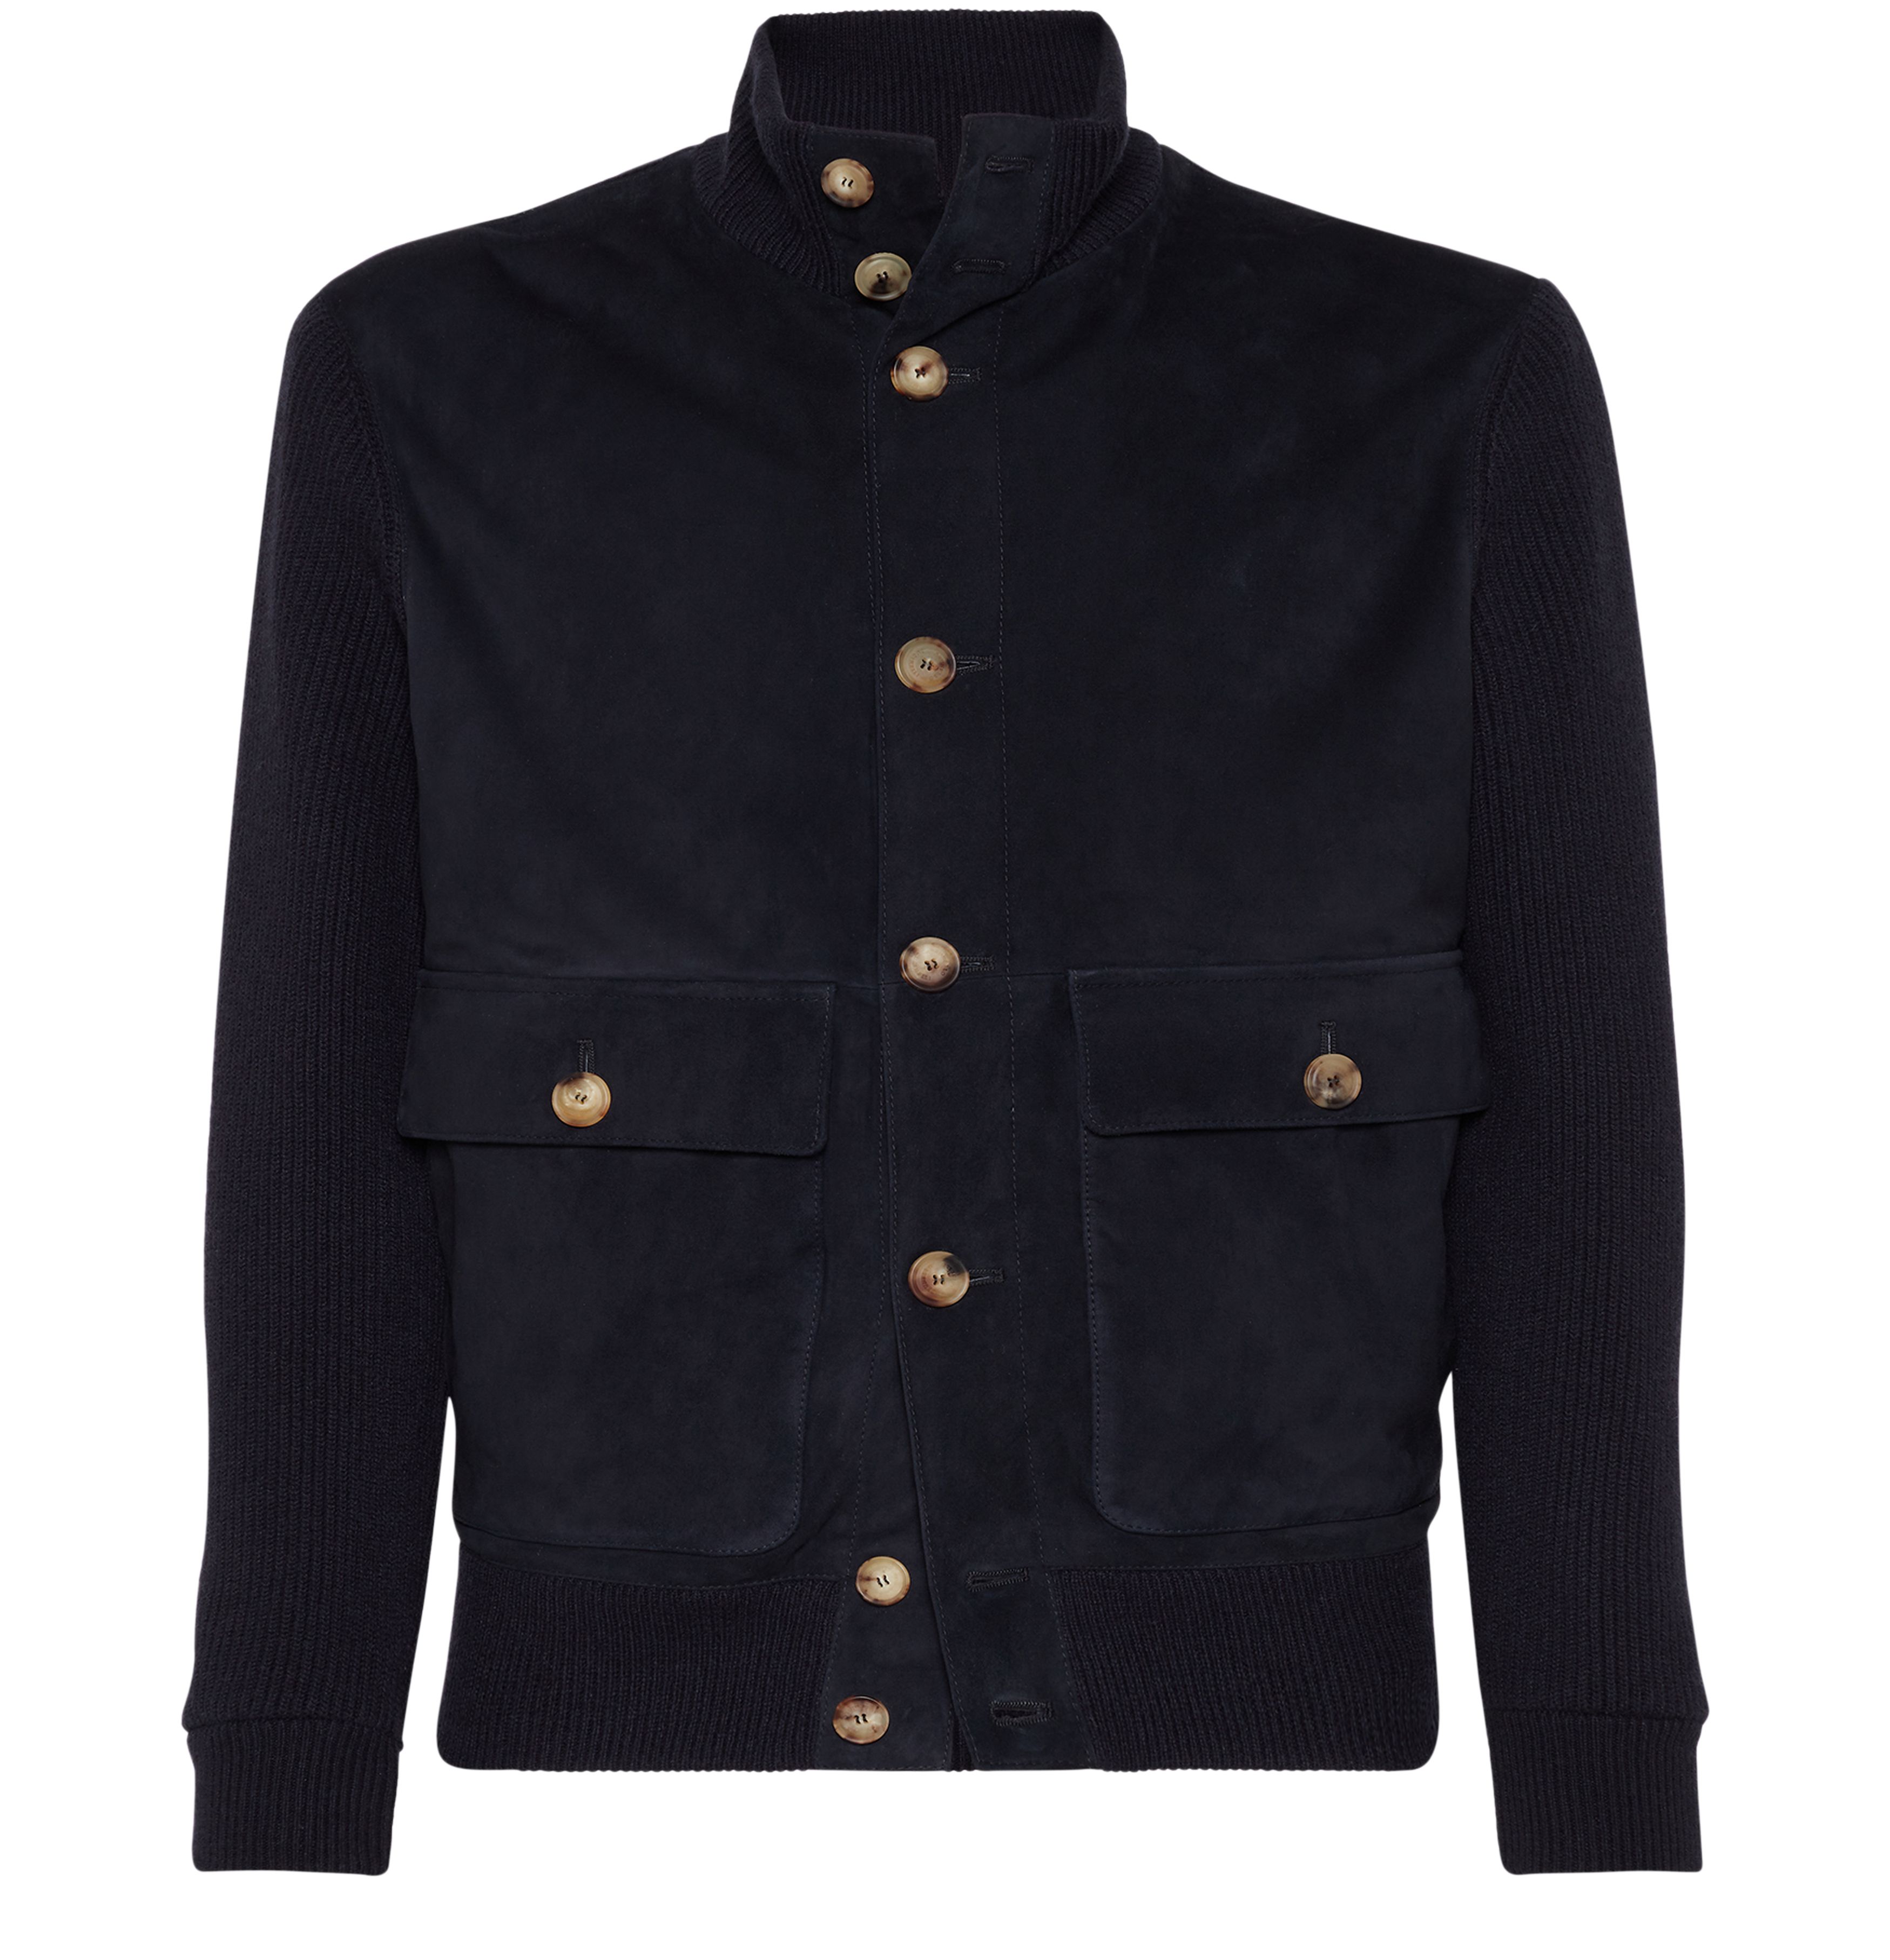 Brunello Cucinelli Suede and knit outerwear jacket